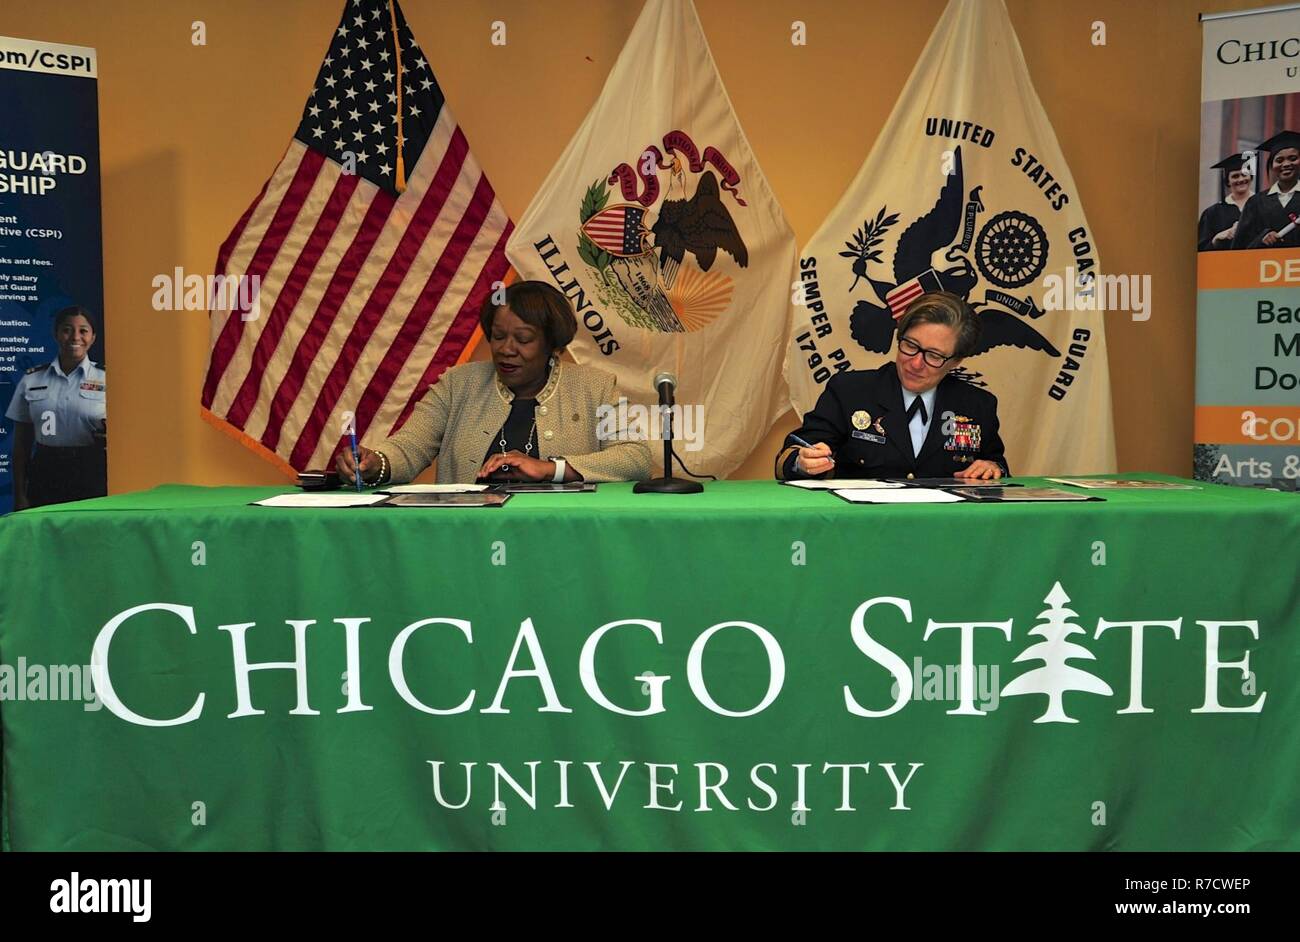 Rear Adm. Joanna Nunan, commander, Ninth Coast Guard District, and Zaldwaynaka Scott, Esq., president of Chicago State University, sign a Memorandum of Agreement during a ceremony at the university, November 30, 2018. The initiative, part of the Coast Guard's Minority Serving Institution Partnership Program, creates a partnership focused on increasing diversity within the Coast Guard's officer corps while providing scholarship and research opportunities for students. Stock Photo